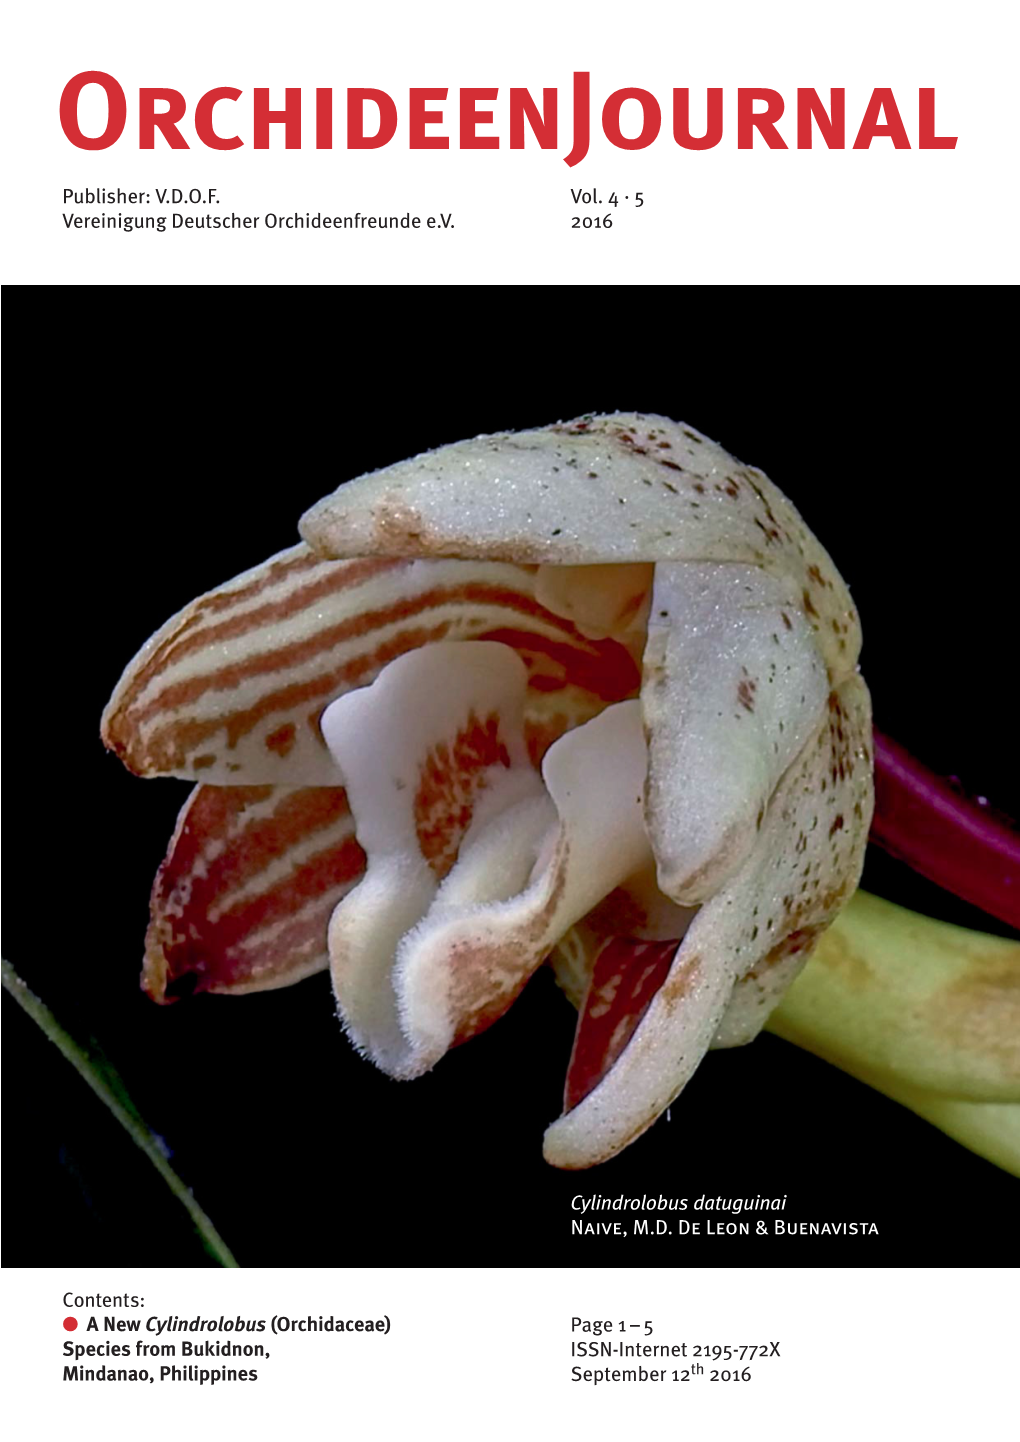 A New Cylindrolobus (Orchidaceae) Species from Bukidnon, Mindanao, Philippines